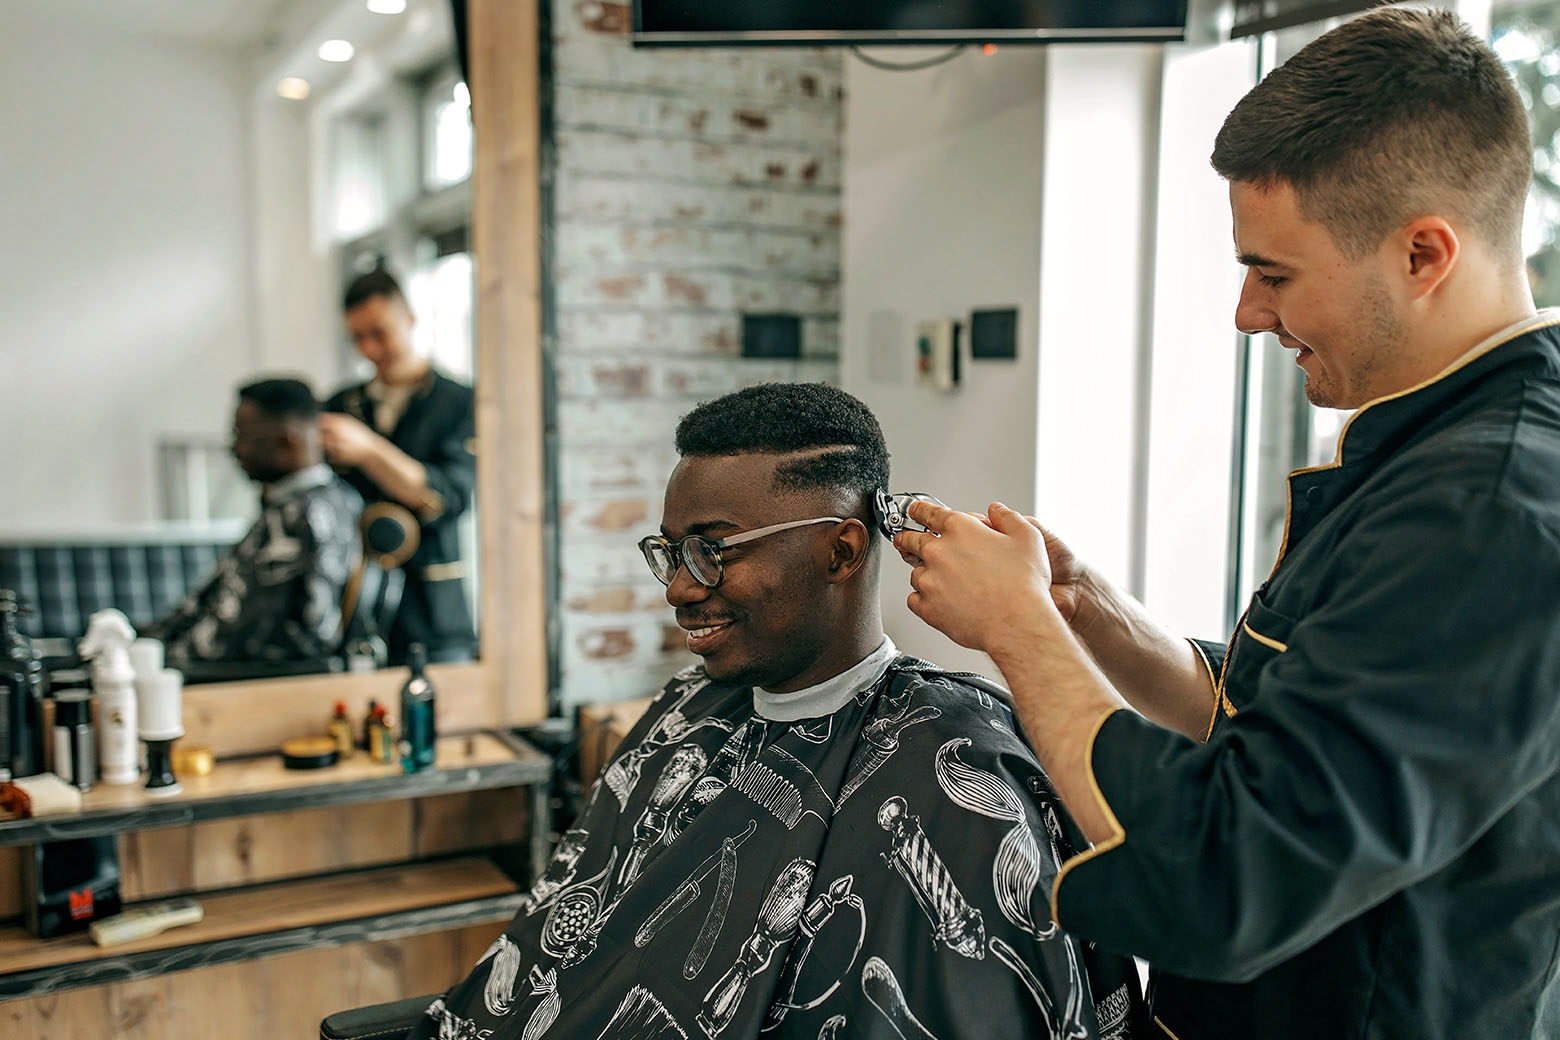 A person sitting in the barber chair, wearing a black smock with white barbershop illustrations, with barber cutting cutting hair